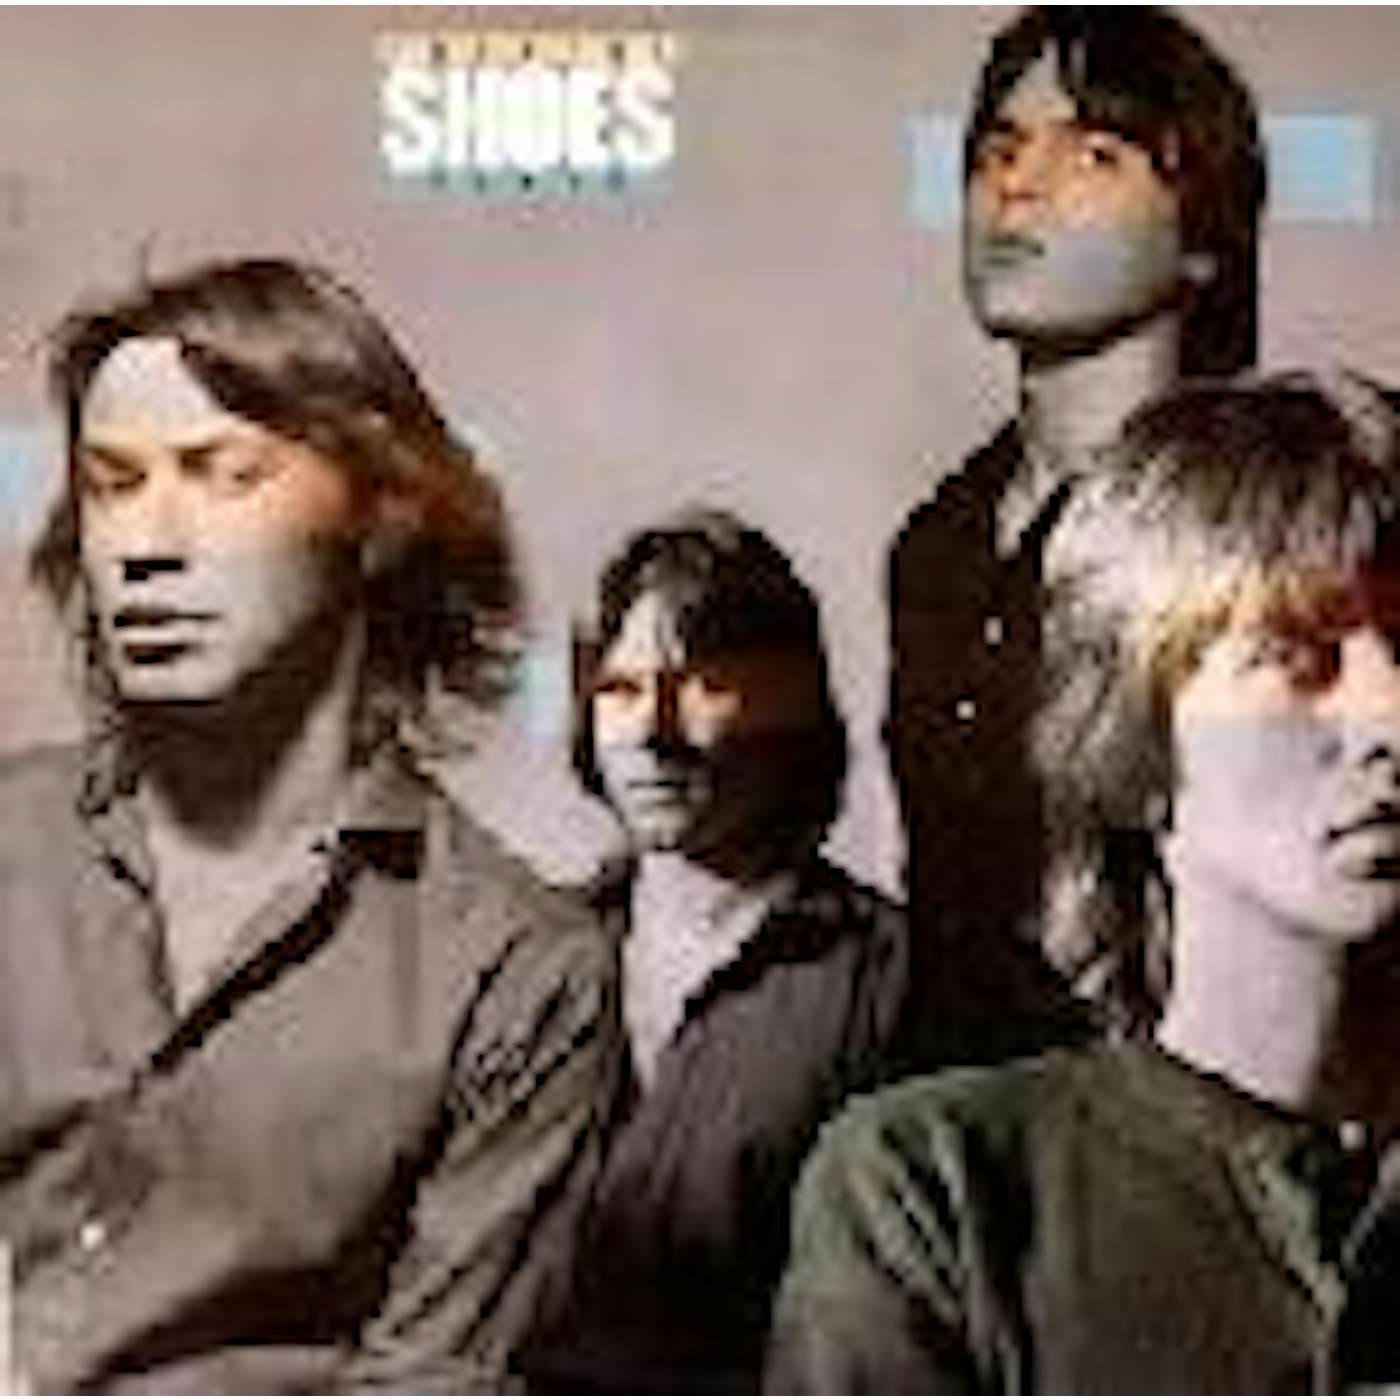 Shoes PRESENT TENSE (PAPER SLEEVE) CD